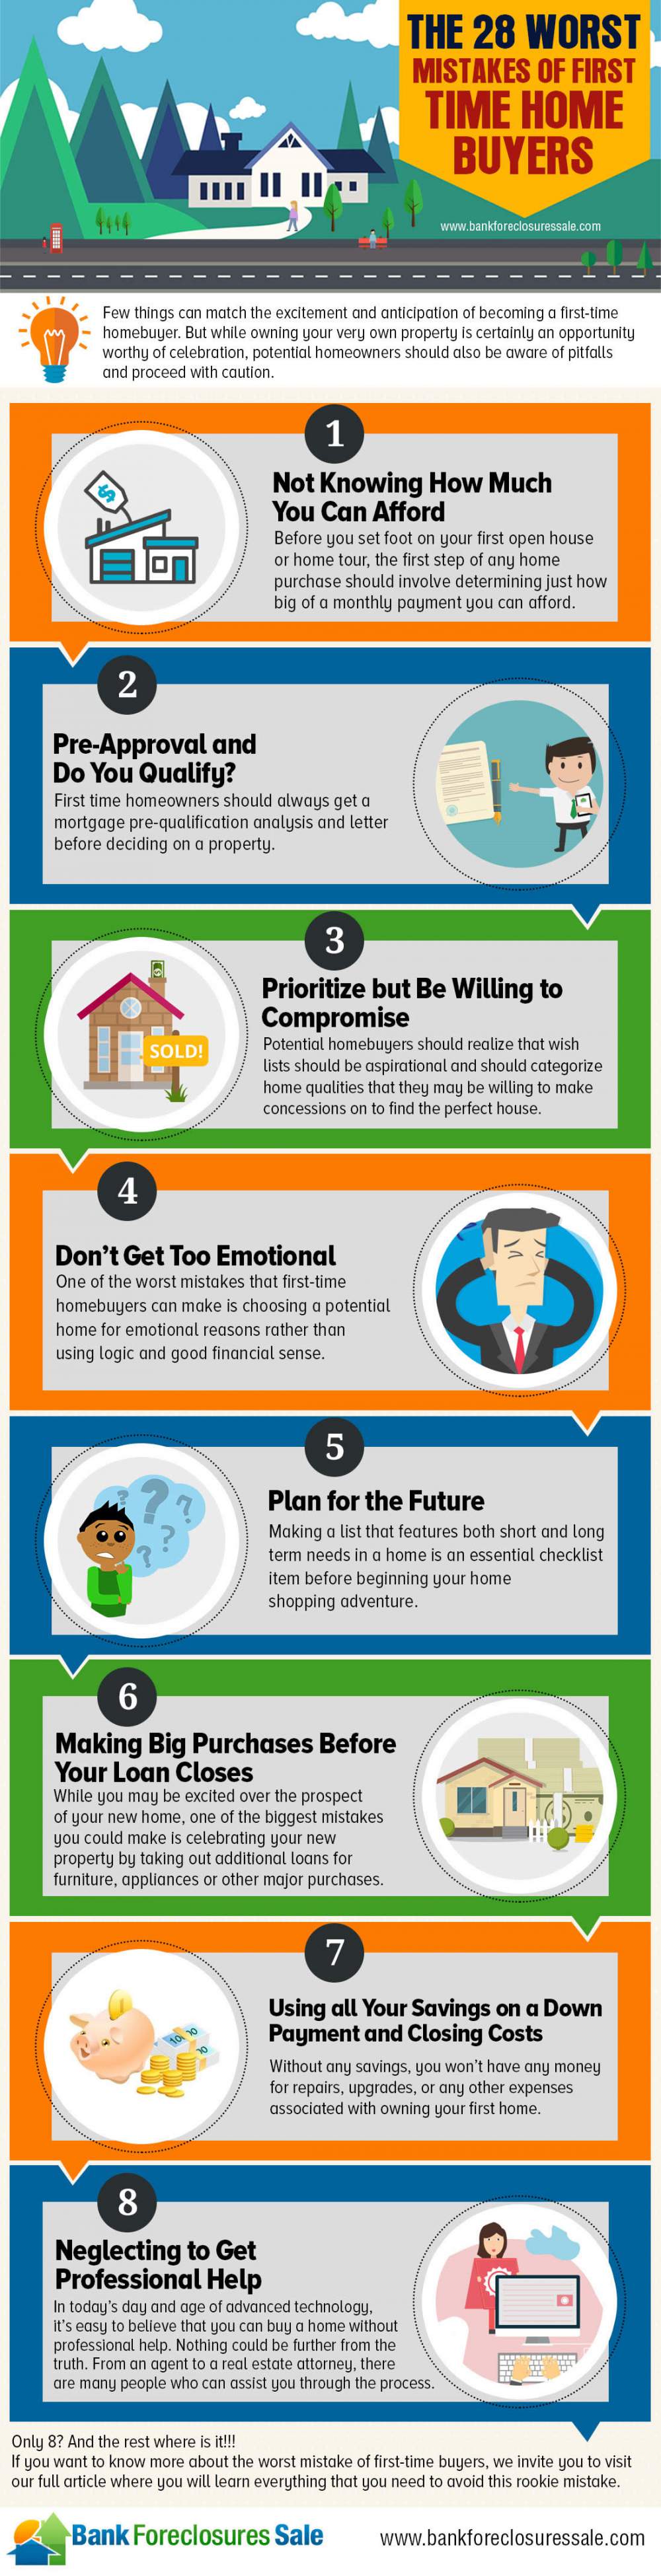 Home Buyers Mistakes